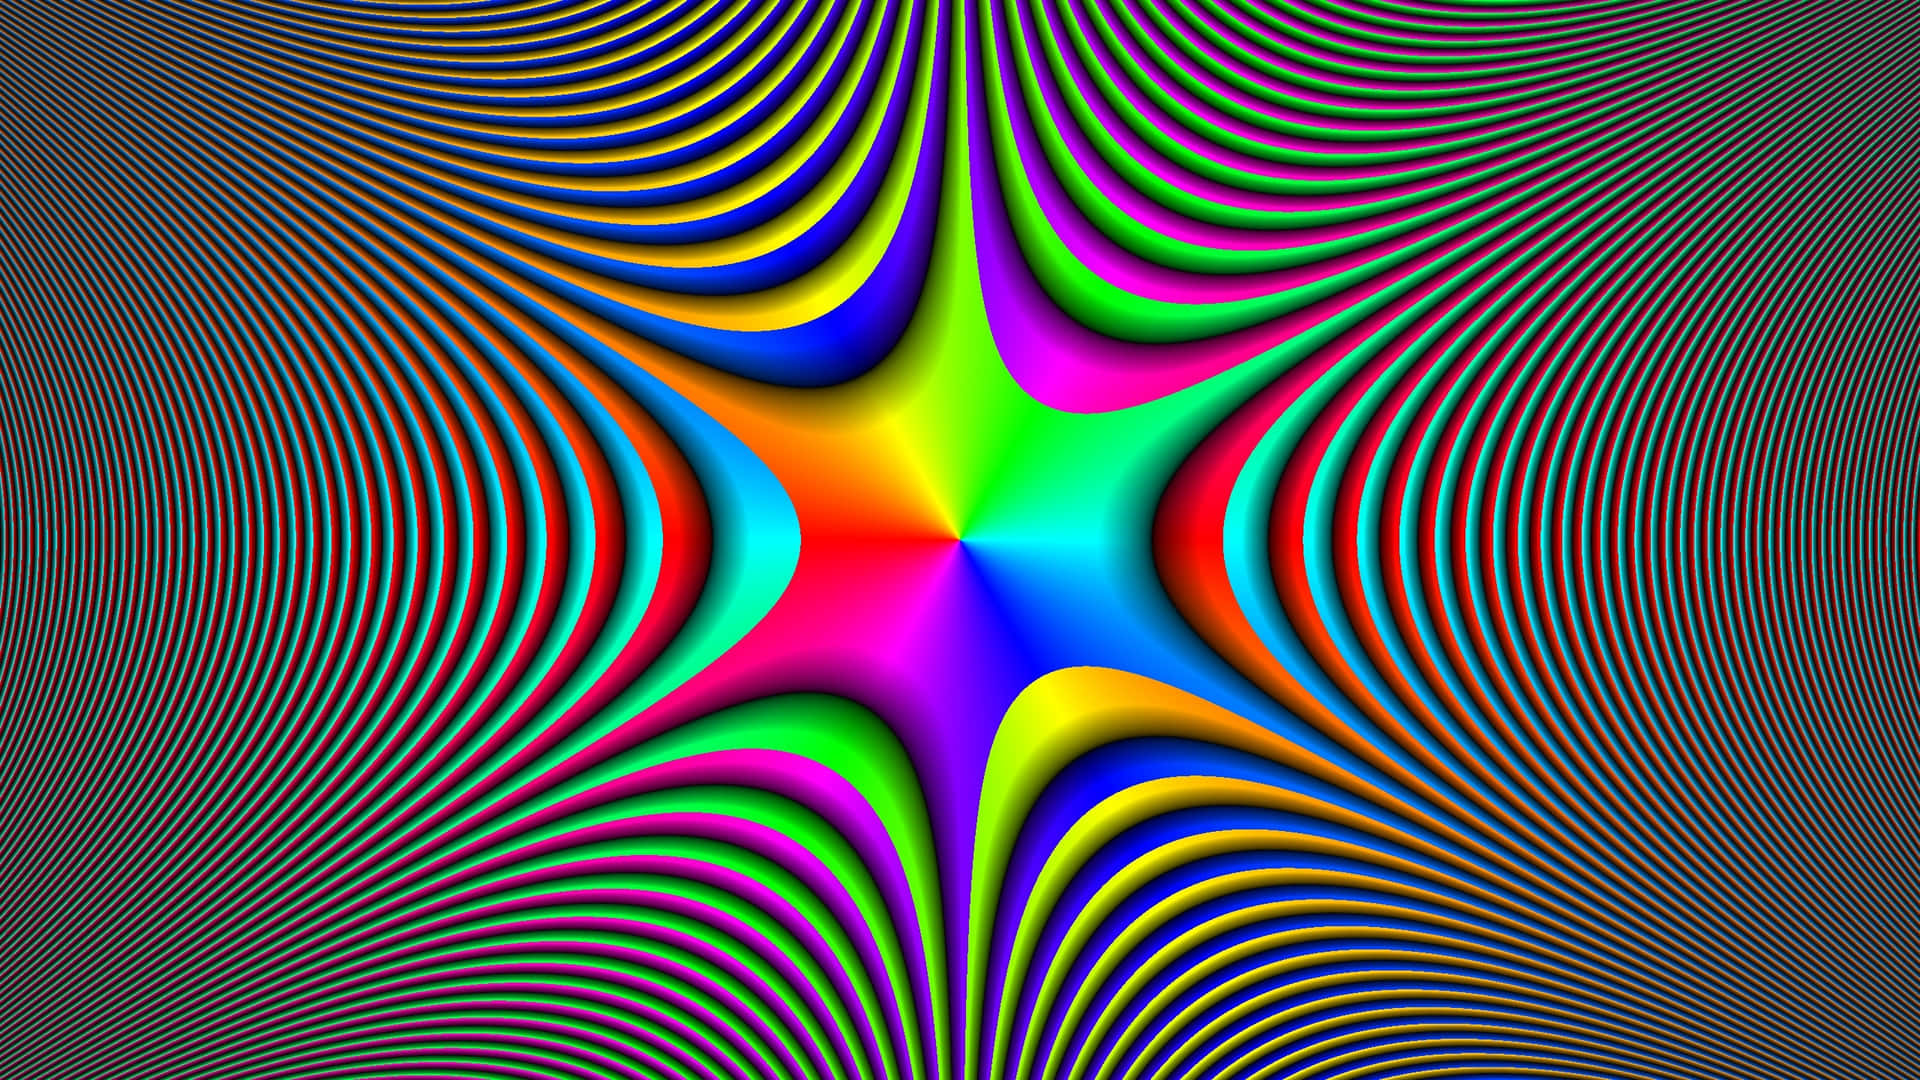 Abstract Rainbow Color Illusion Picture